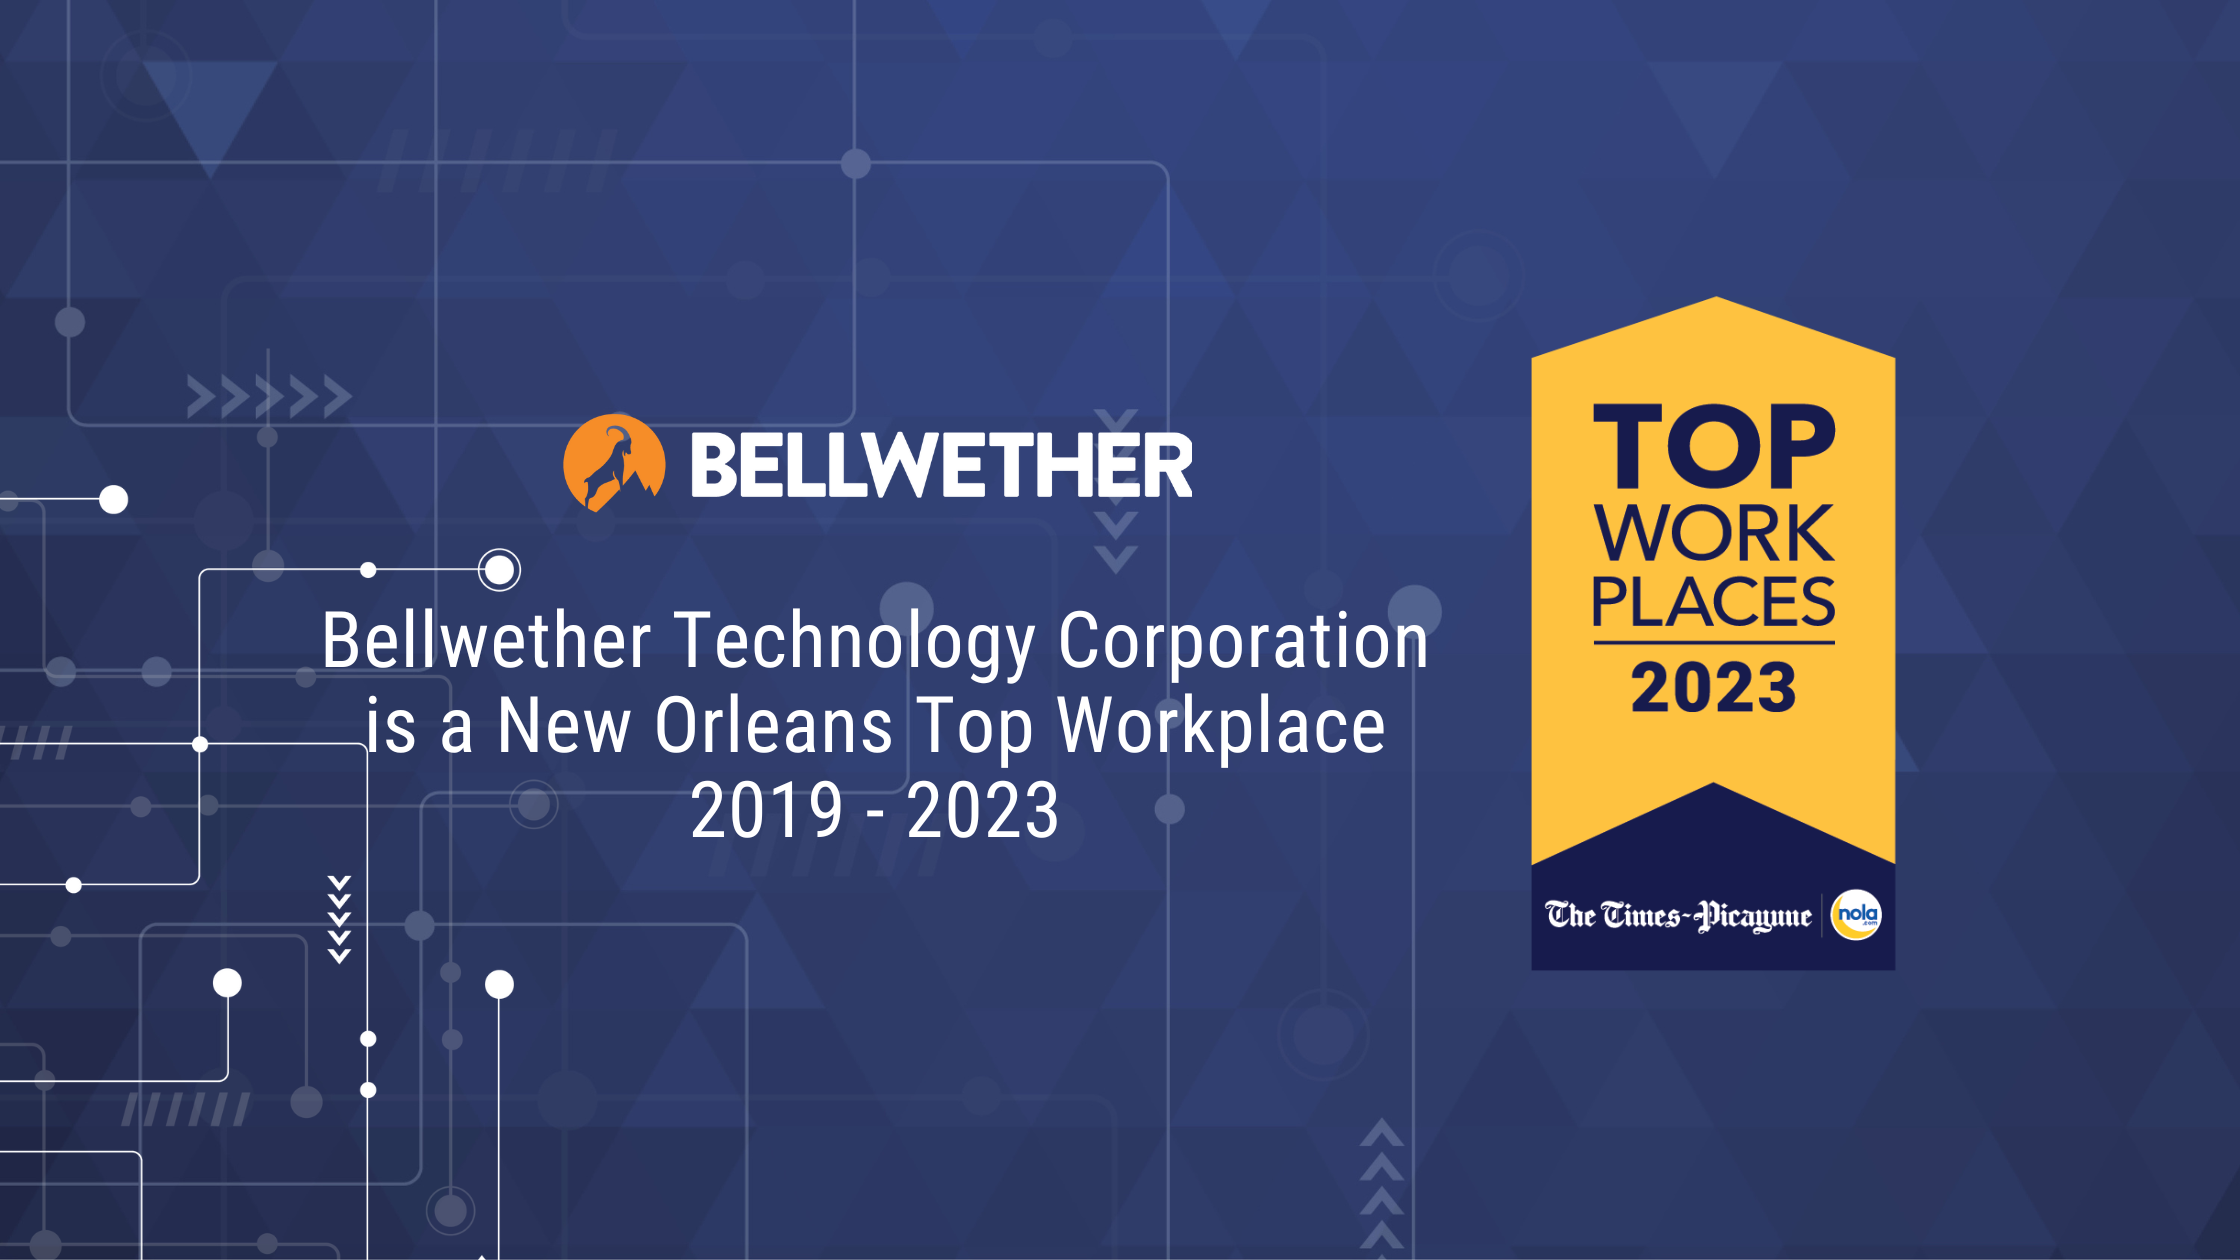 Bellwether Technology Corporation is a New Orleans Top Workplace 2019 - 2023